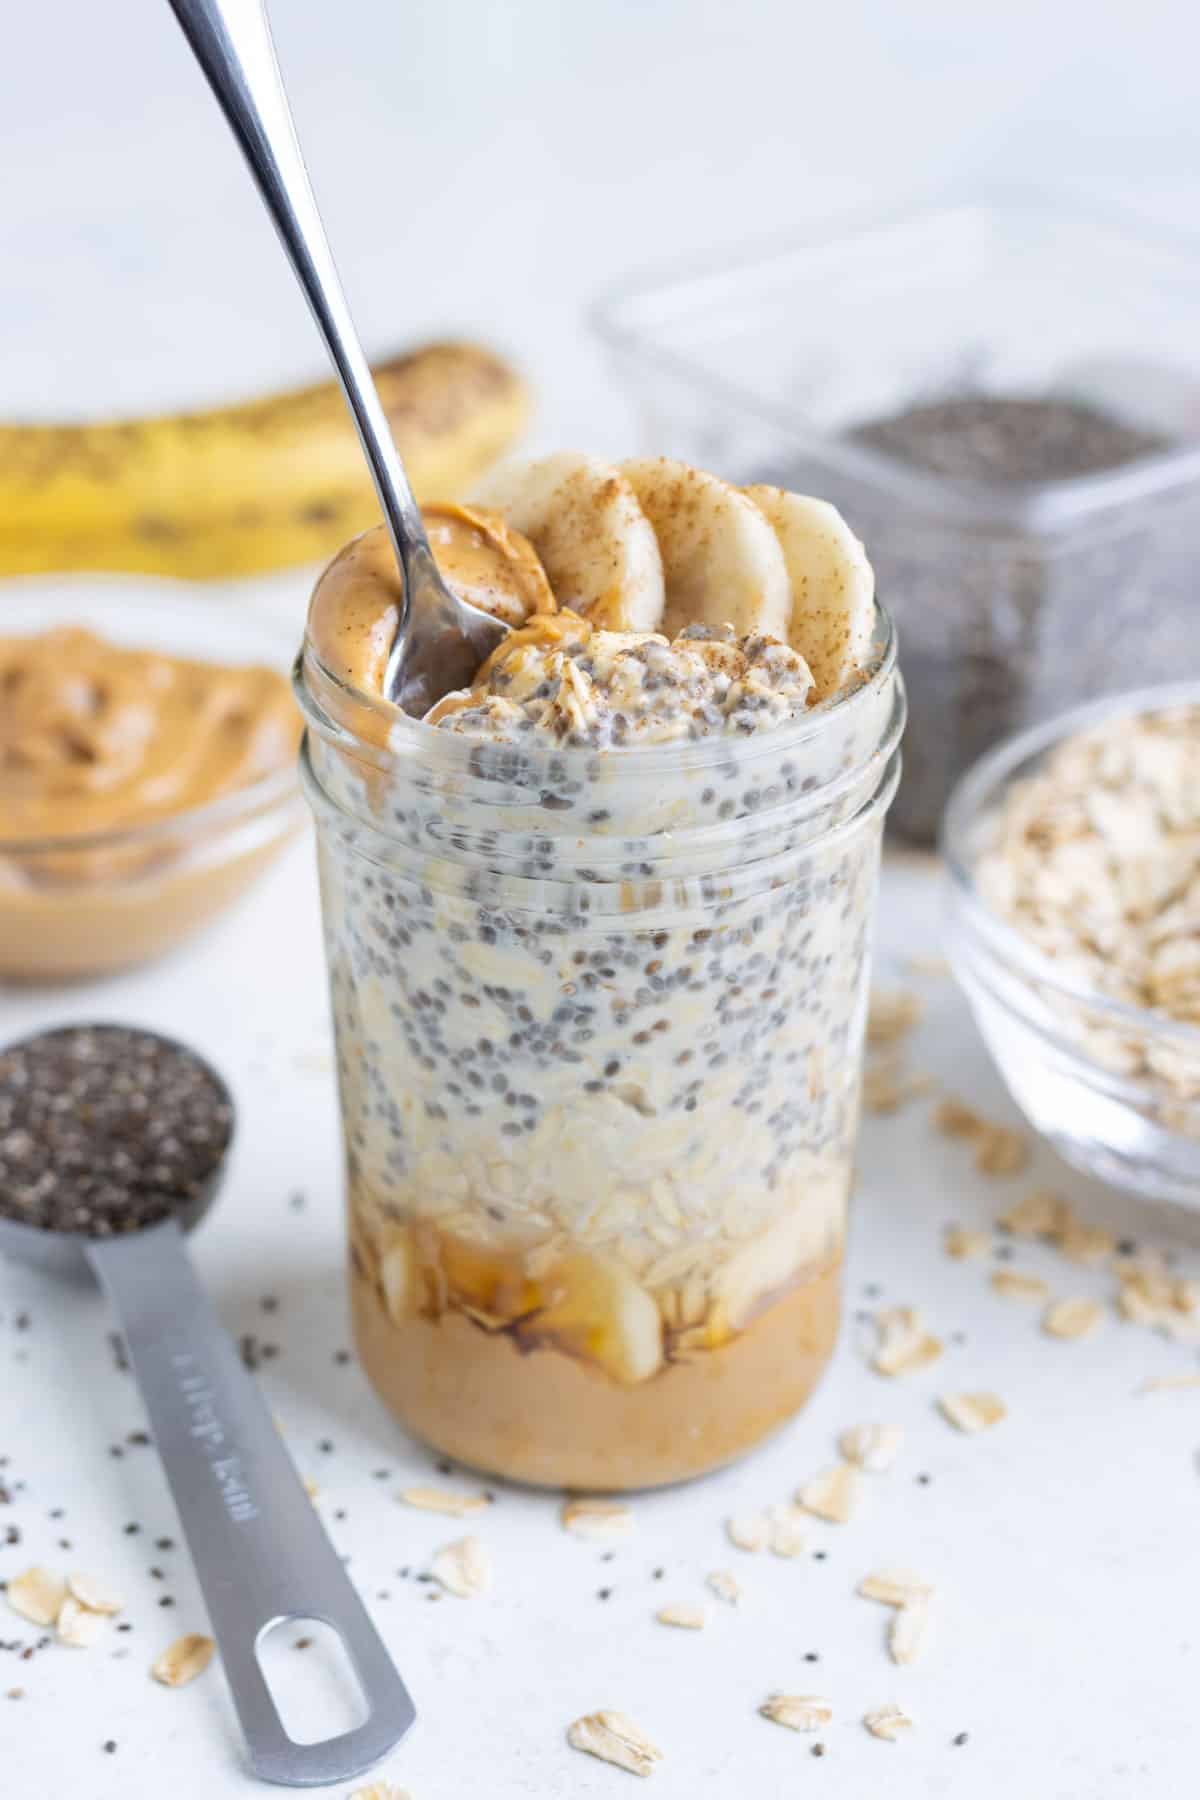 Mason jars are filled with healthy oatmeal ingredients for a quick breakfast.